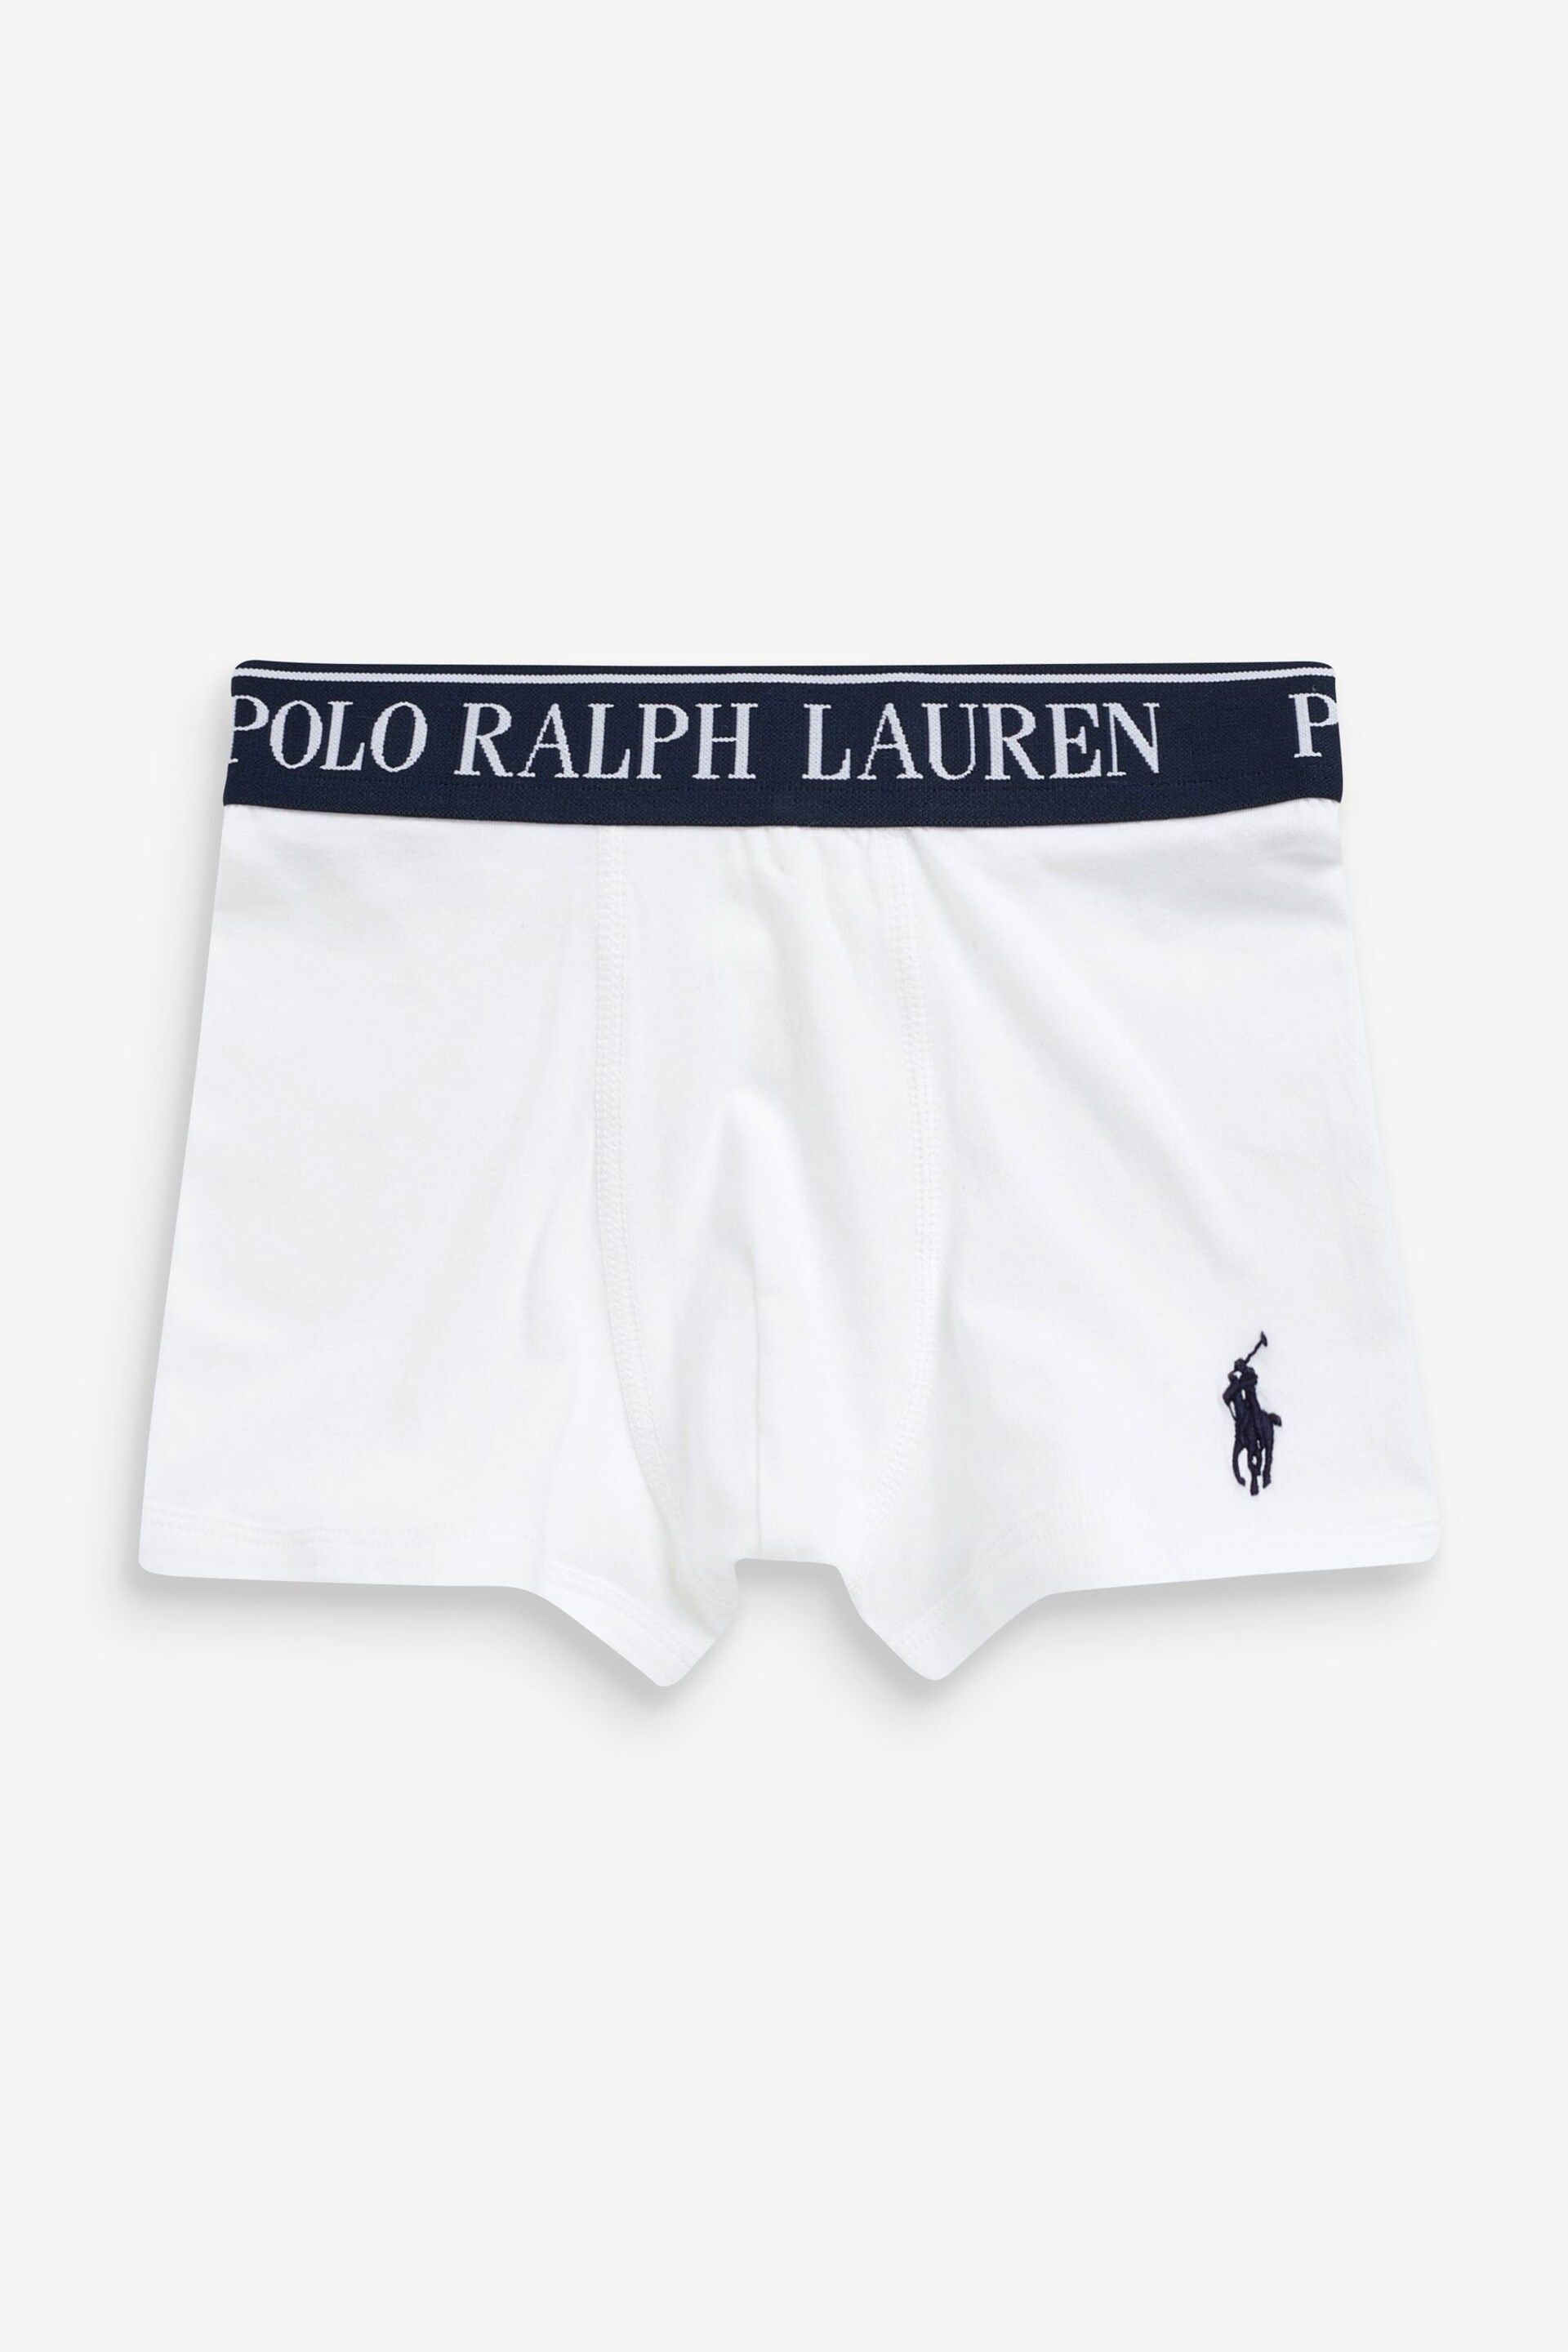 Polo Ralph Lauren Boys White Waistband Boxers 3 Pack - Image 2 of 4